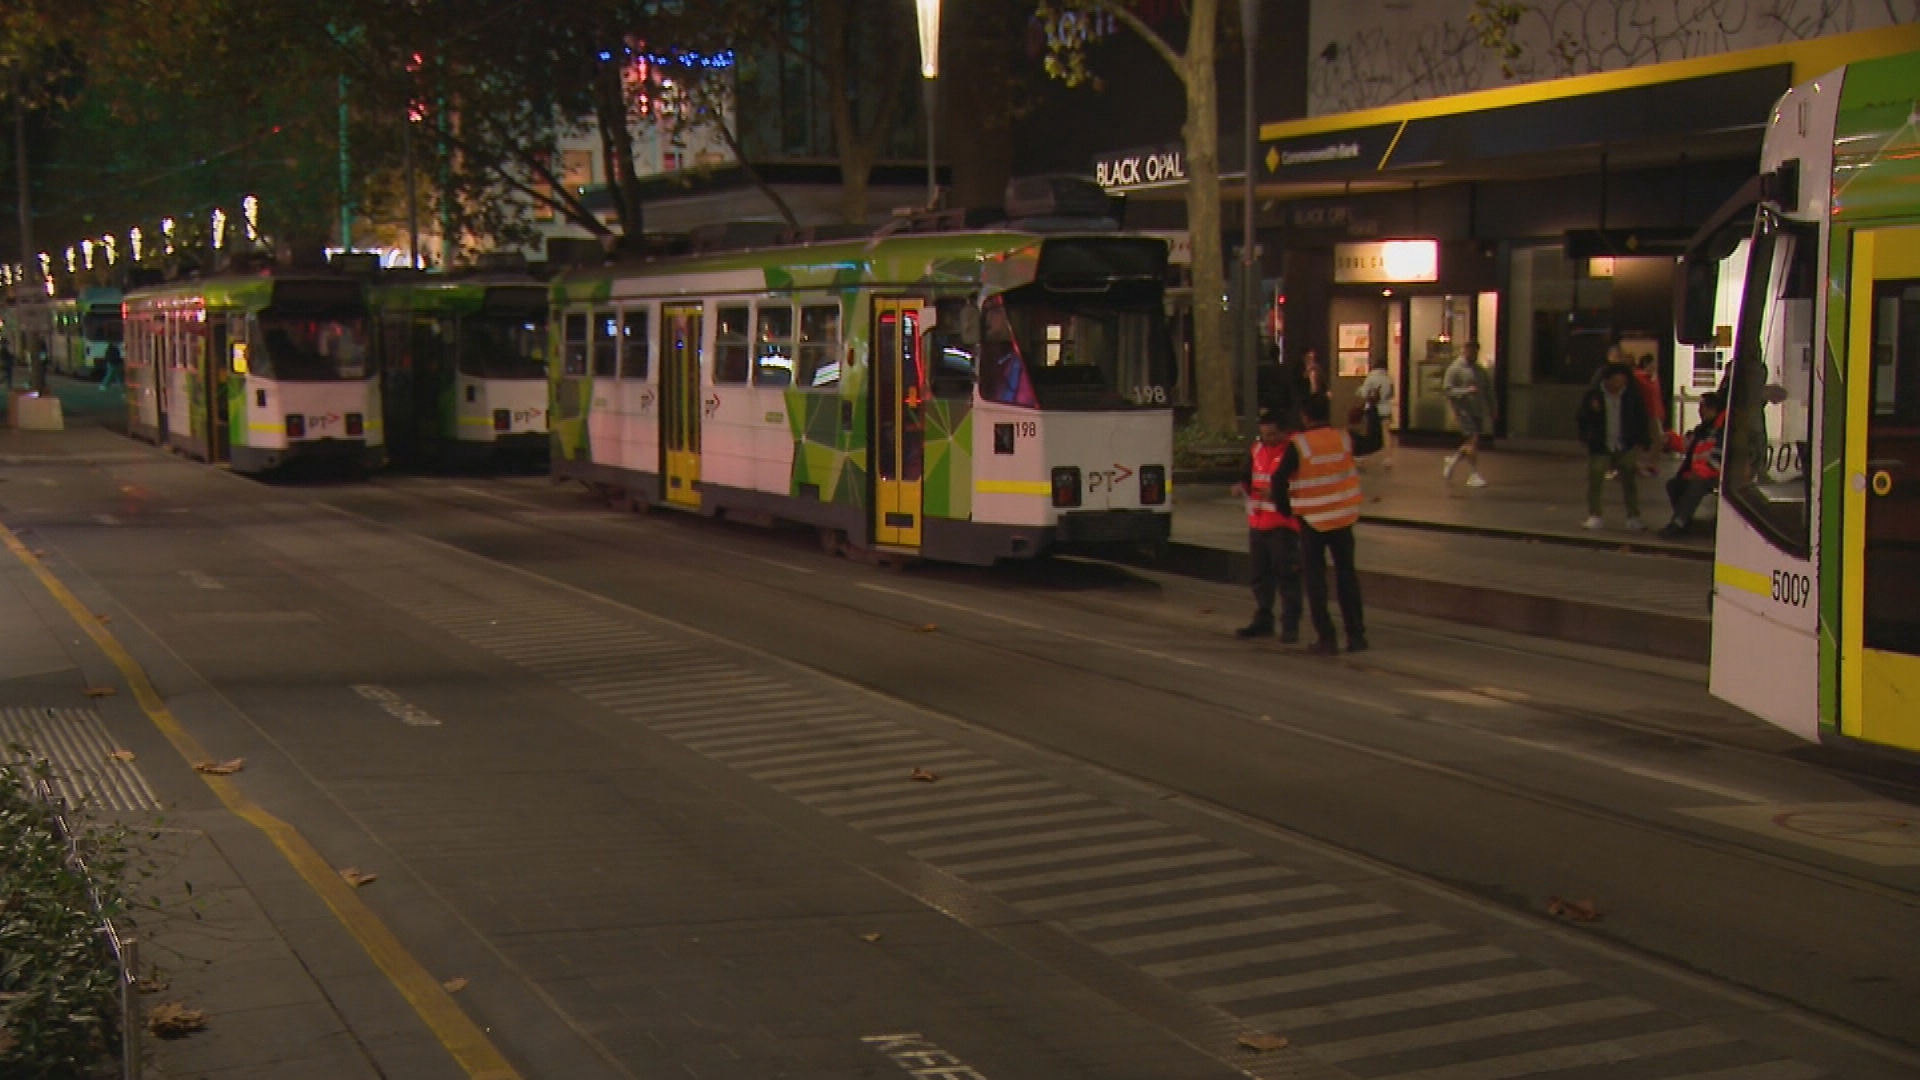 A large tram route shutdown in the CBD on Wednesday night following a problem with the overhead wires.